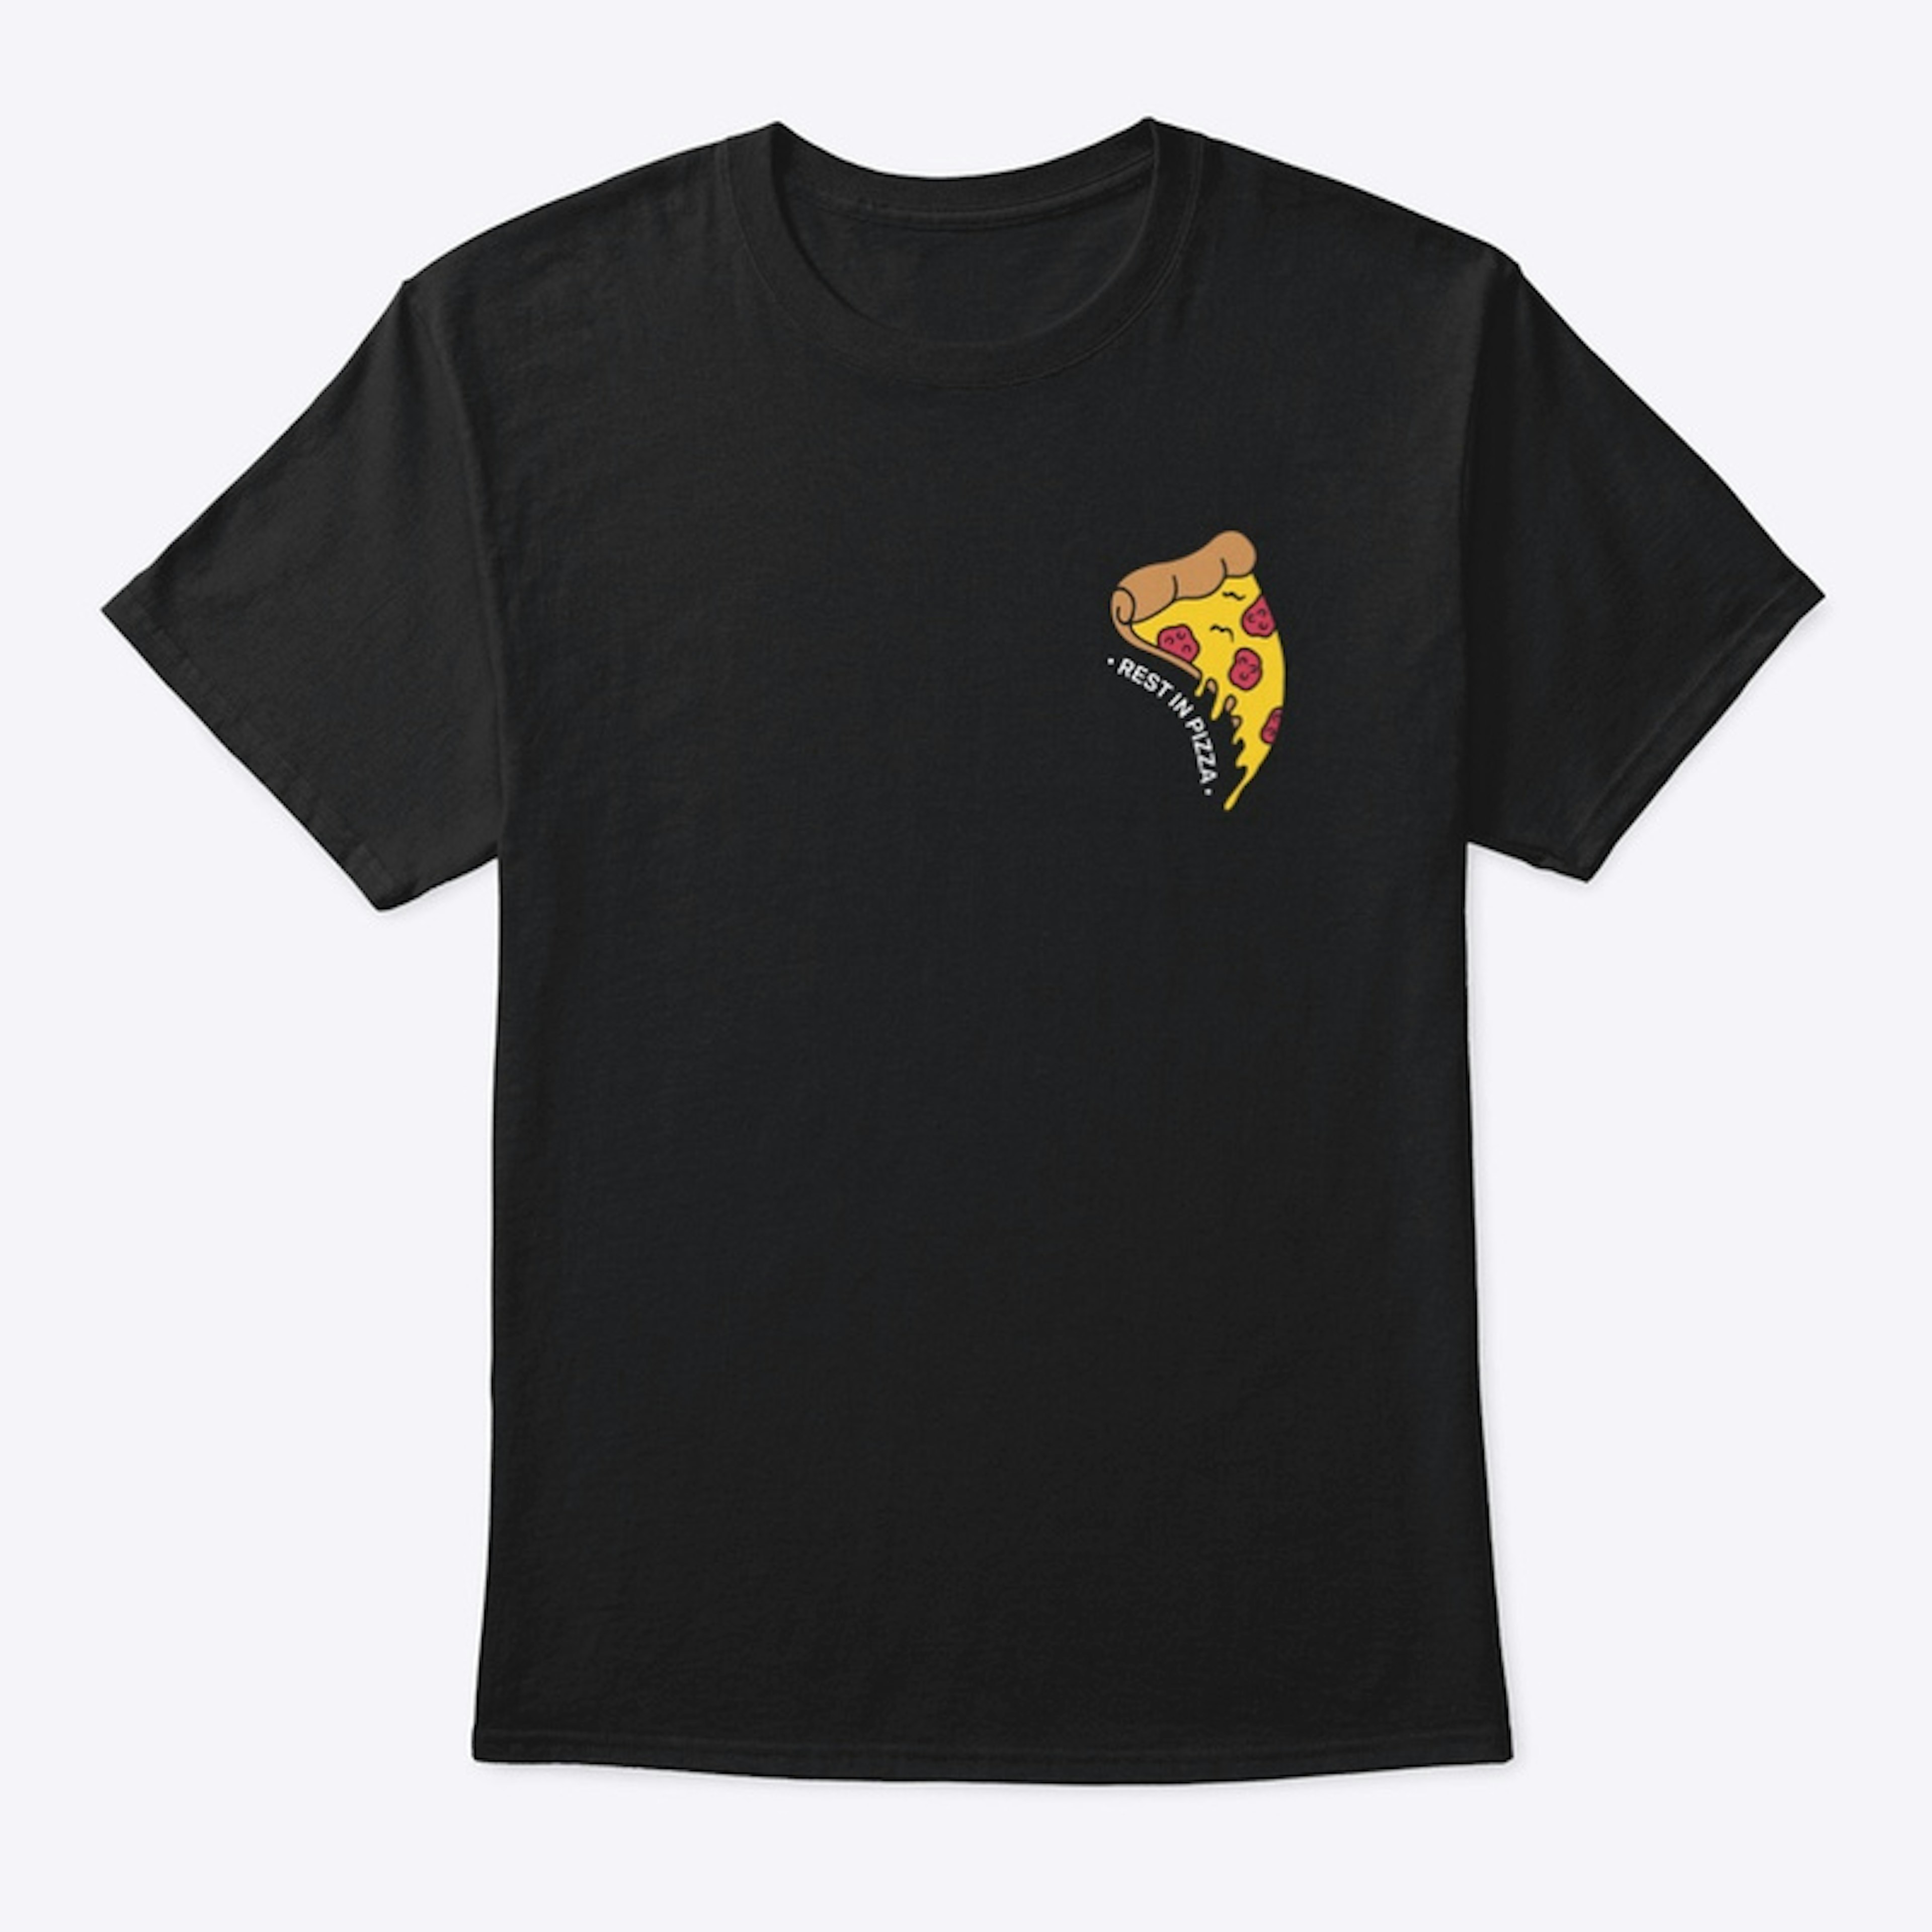 REST IN PIZZA BLACK T-SHIRT